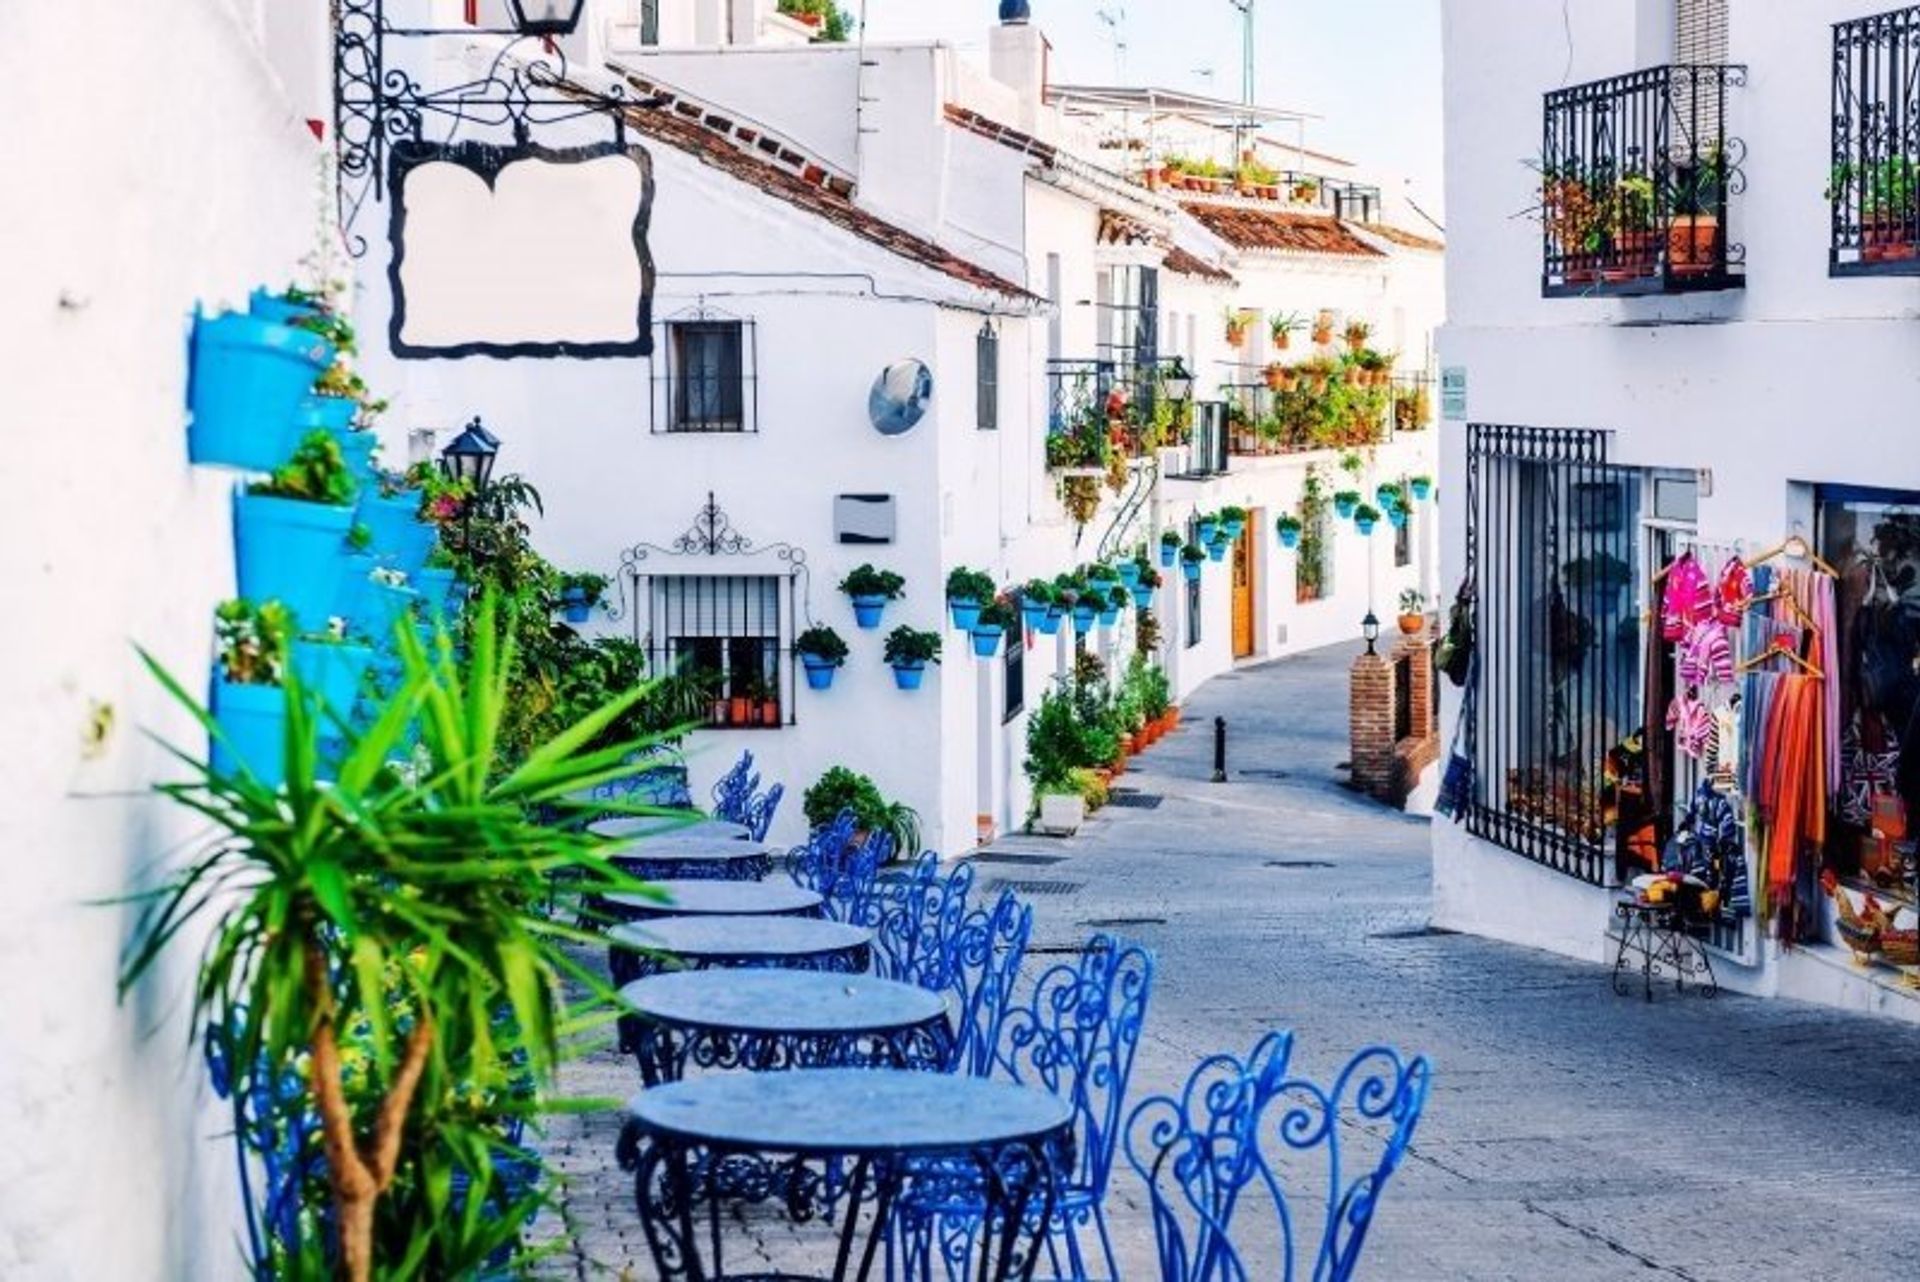 Take in the traditional Andalucian charms of the flower-adorned plazas of Mijas old town